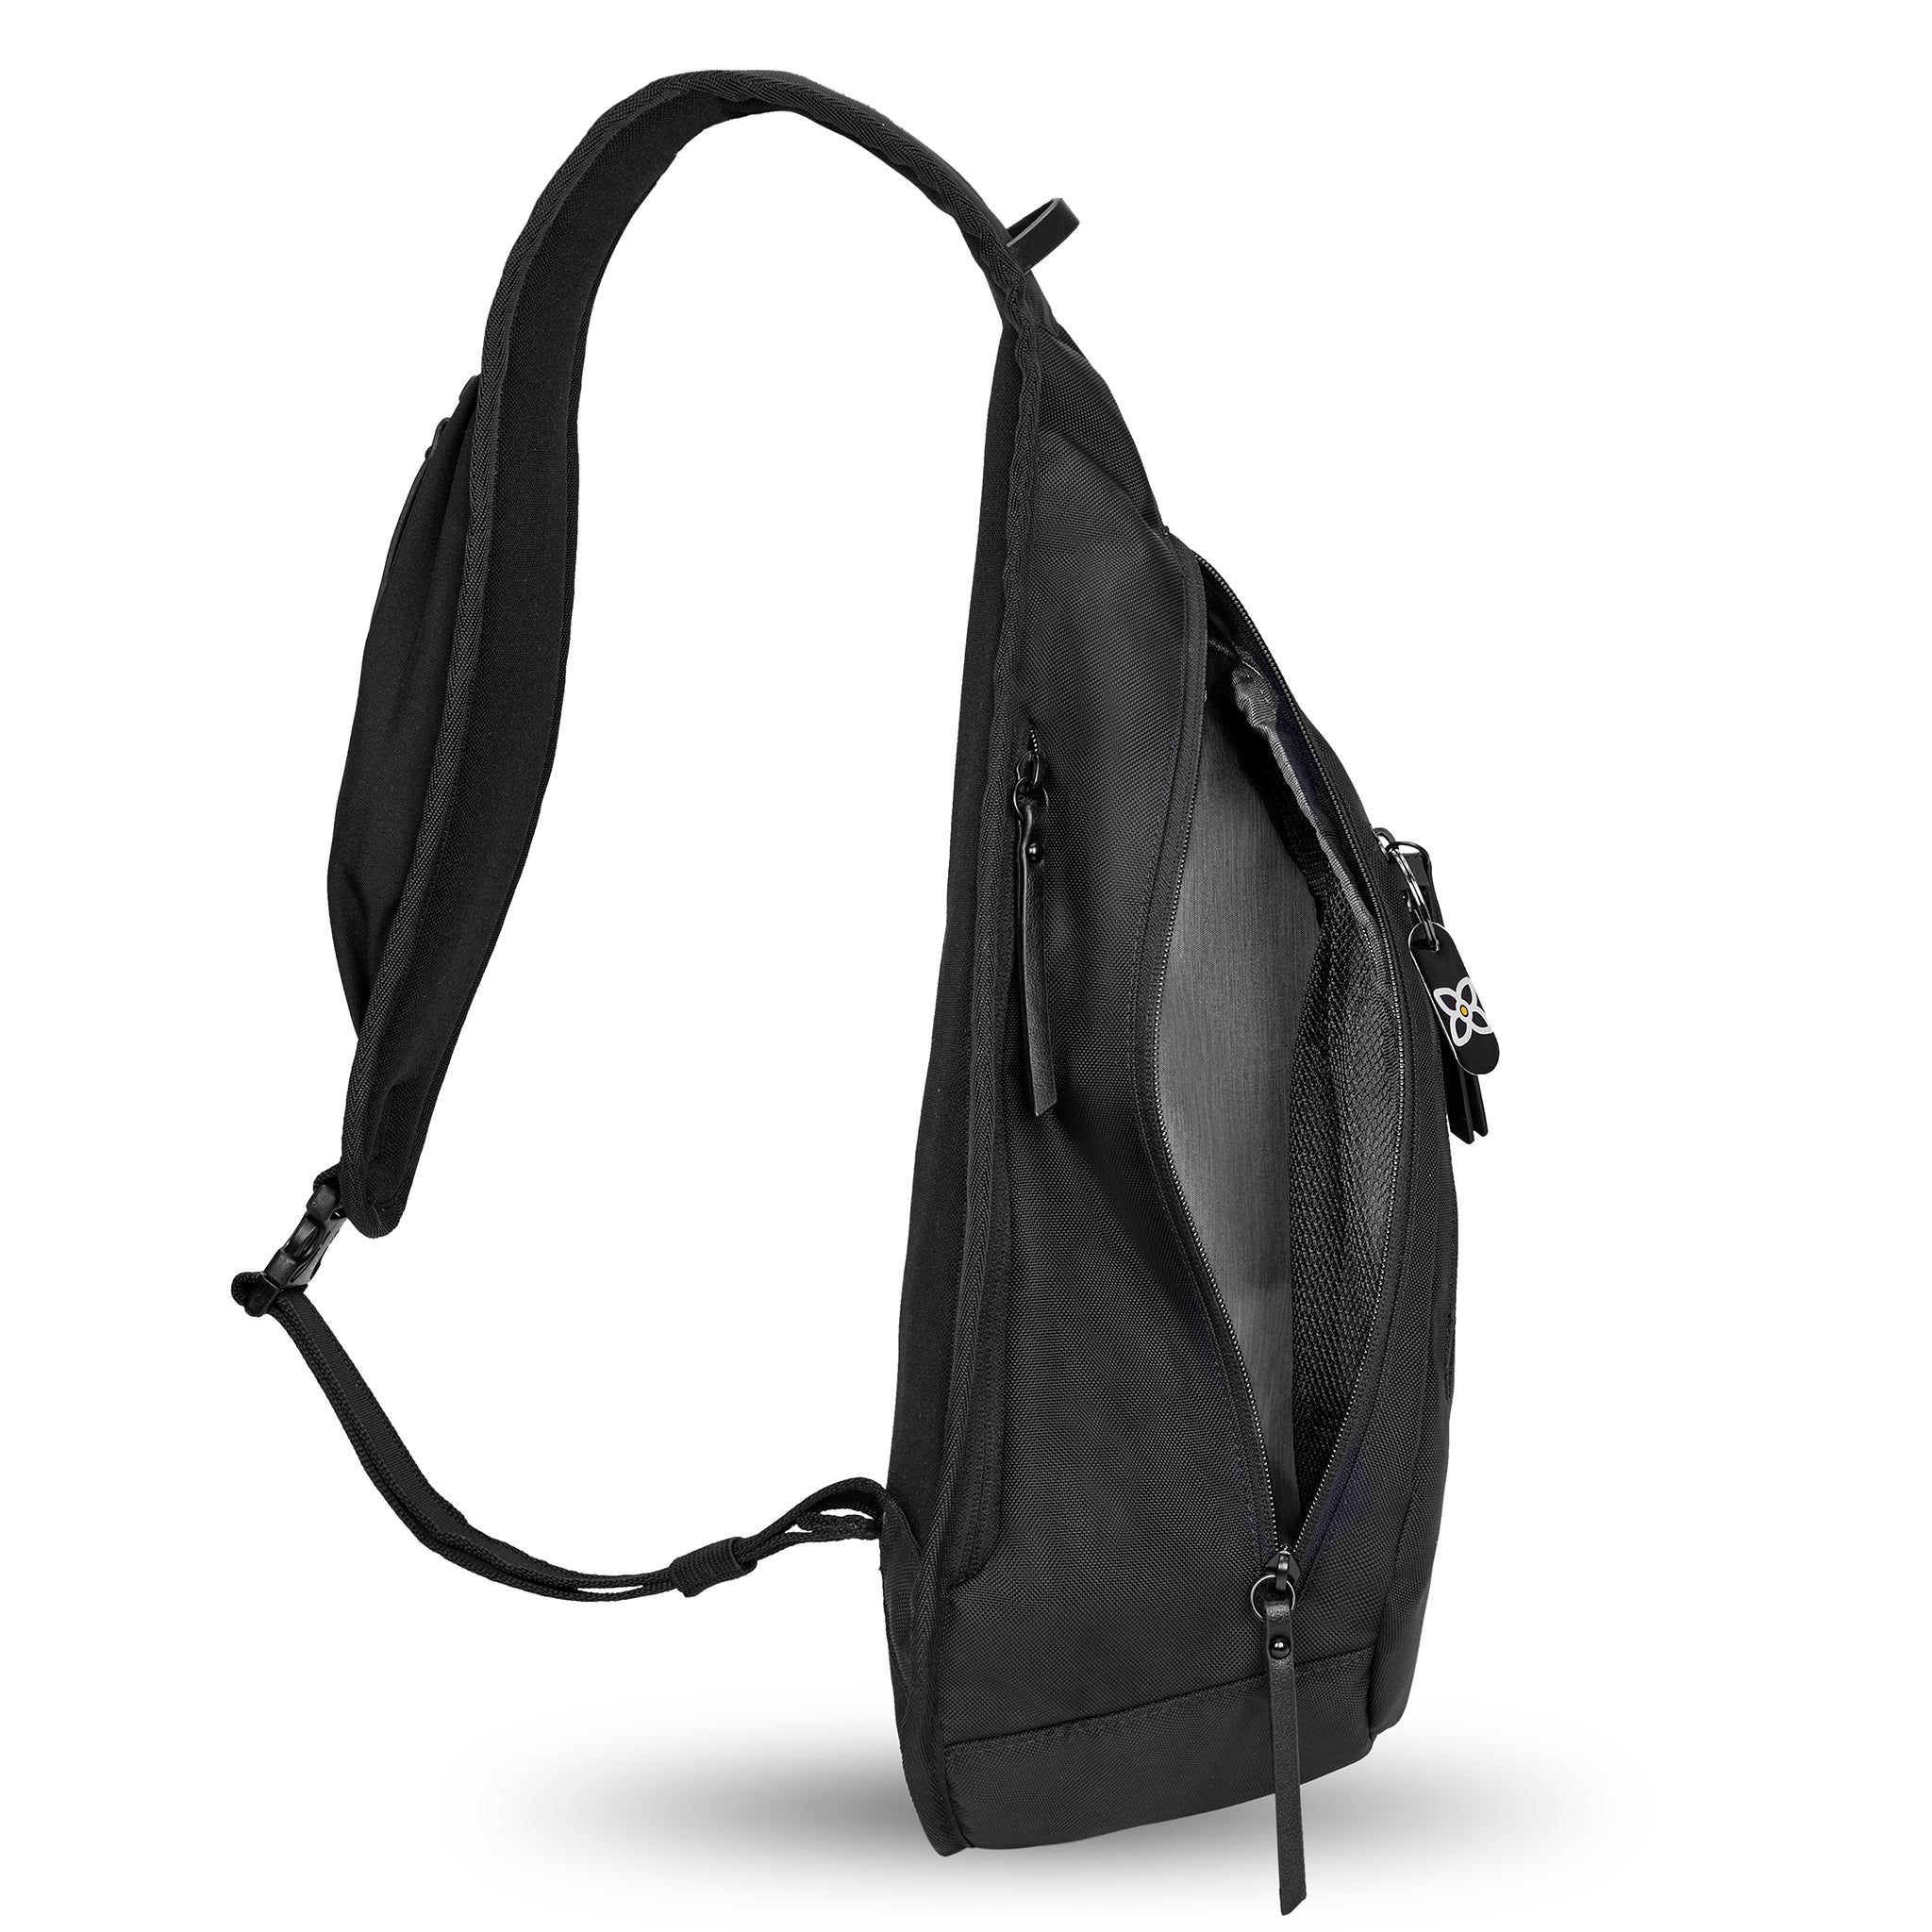 Side view of Sherpani’s Anti-Theft bag, the Esprit AT in Carbon, with vegan leather accents in black. The main zipper compartment is open to reveal a lime green interior. 